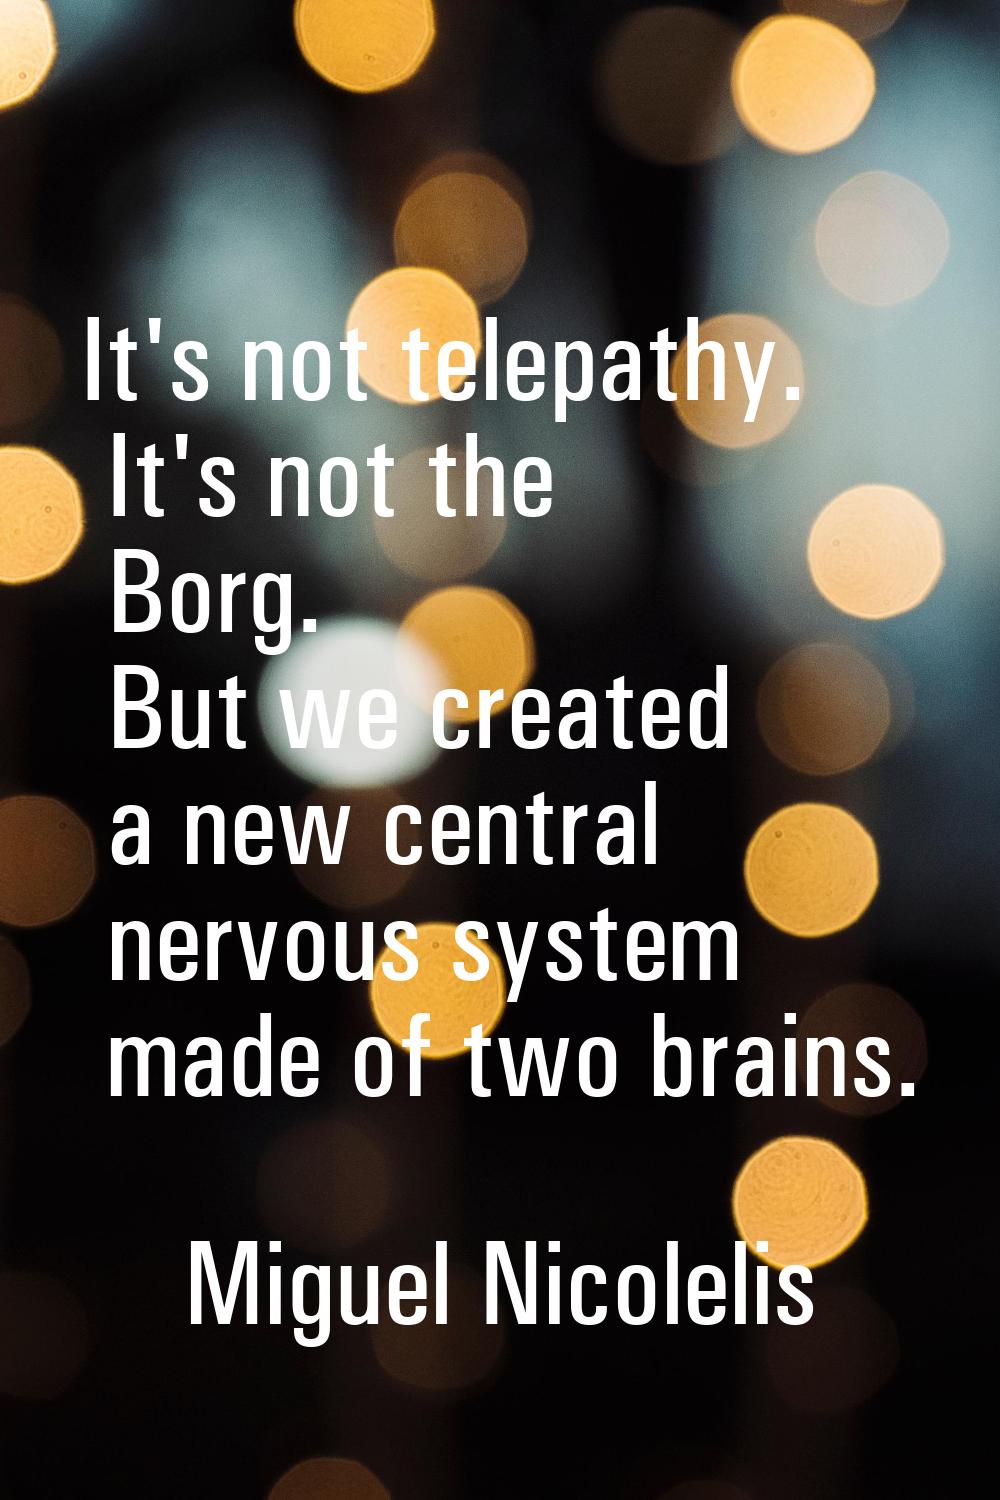 It's not telepathy. It's not the Borg. But we created a new central nervous system made of two brai